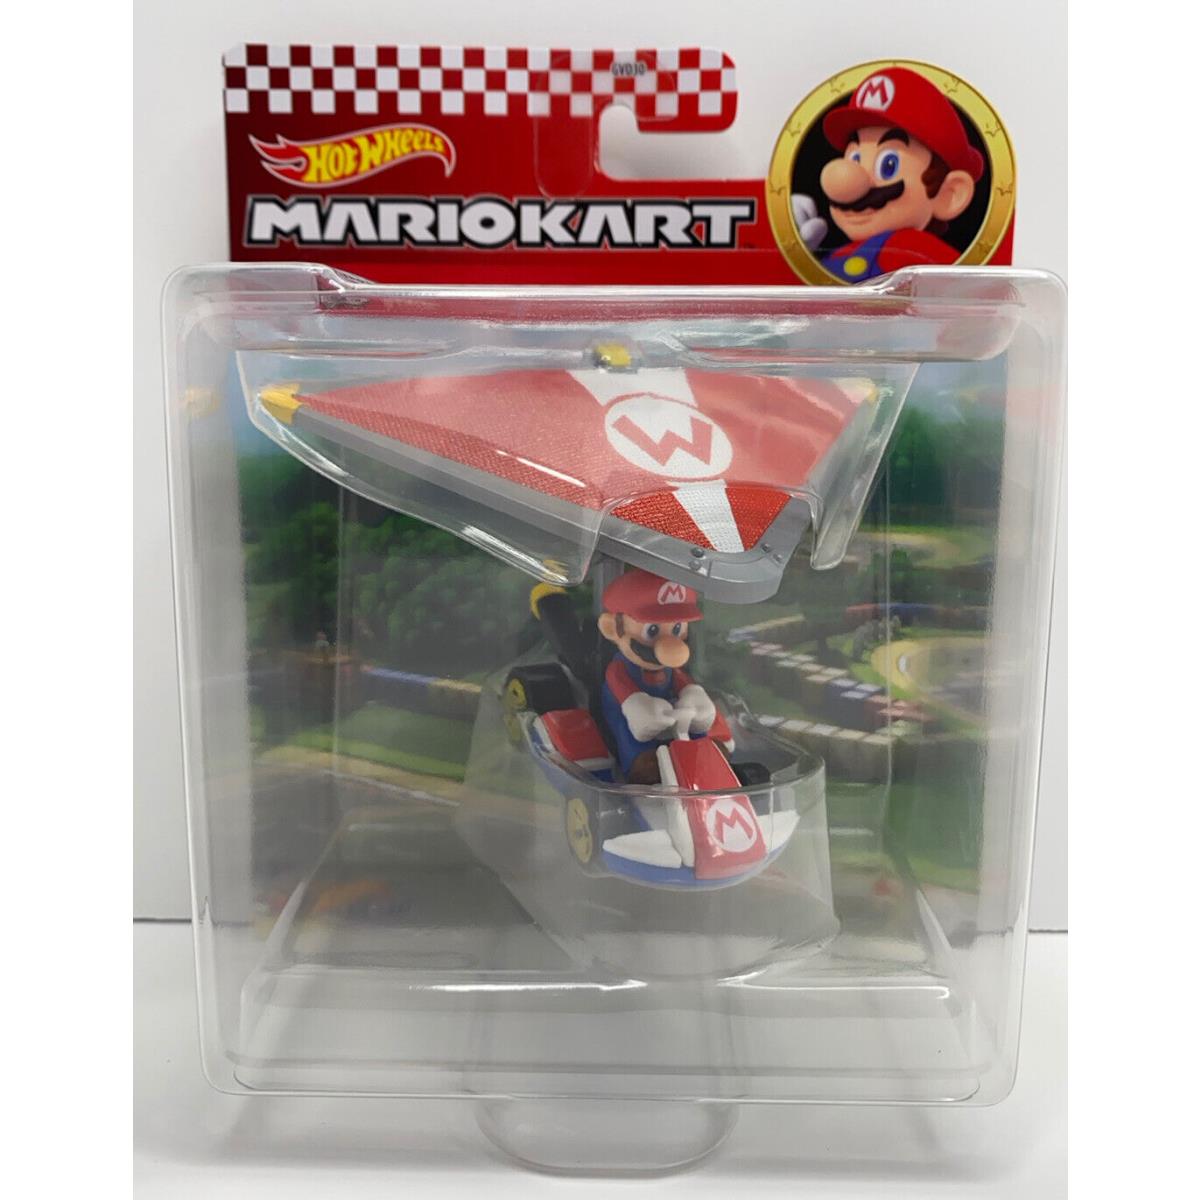 2020 Hot Wheels Mario Kart Complete Set Of 5 Cars with Gliders